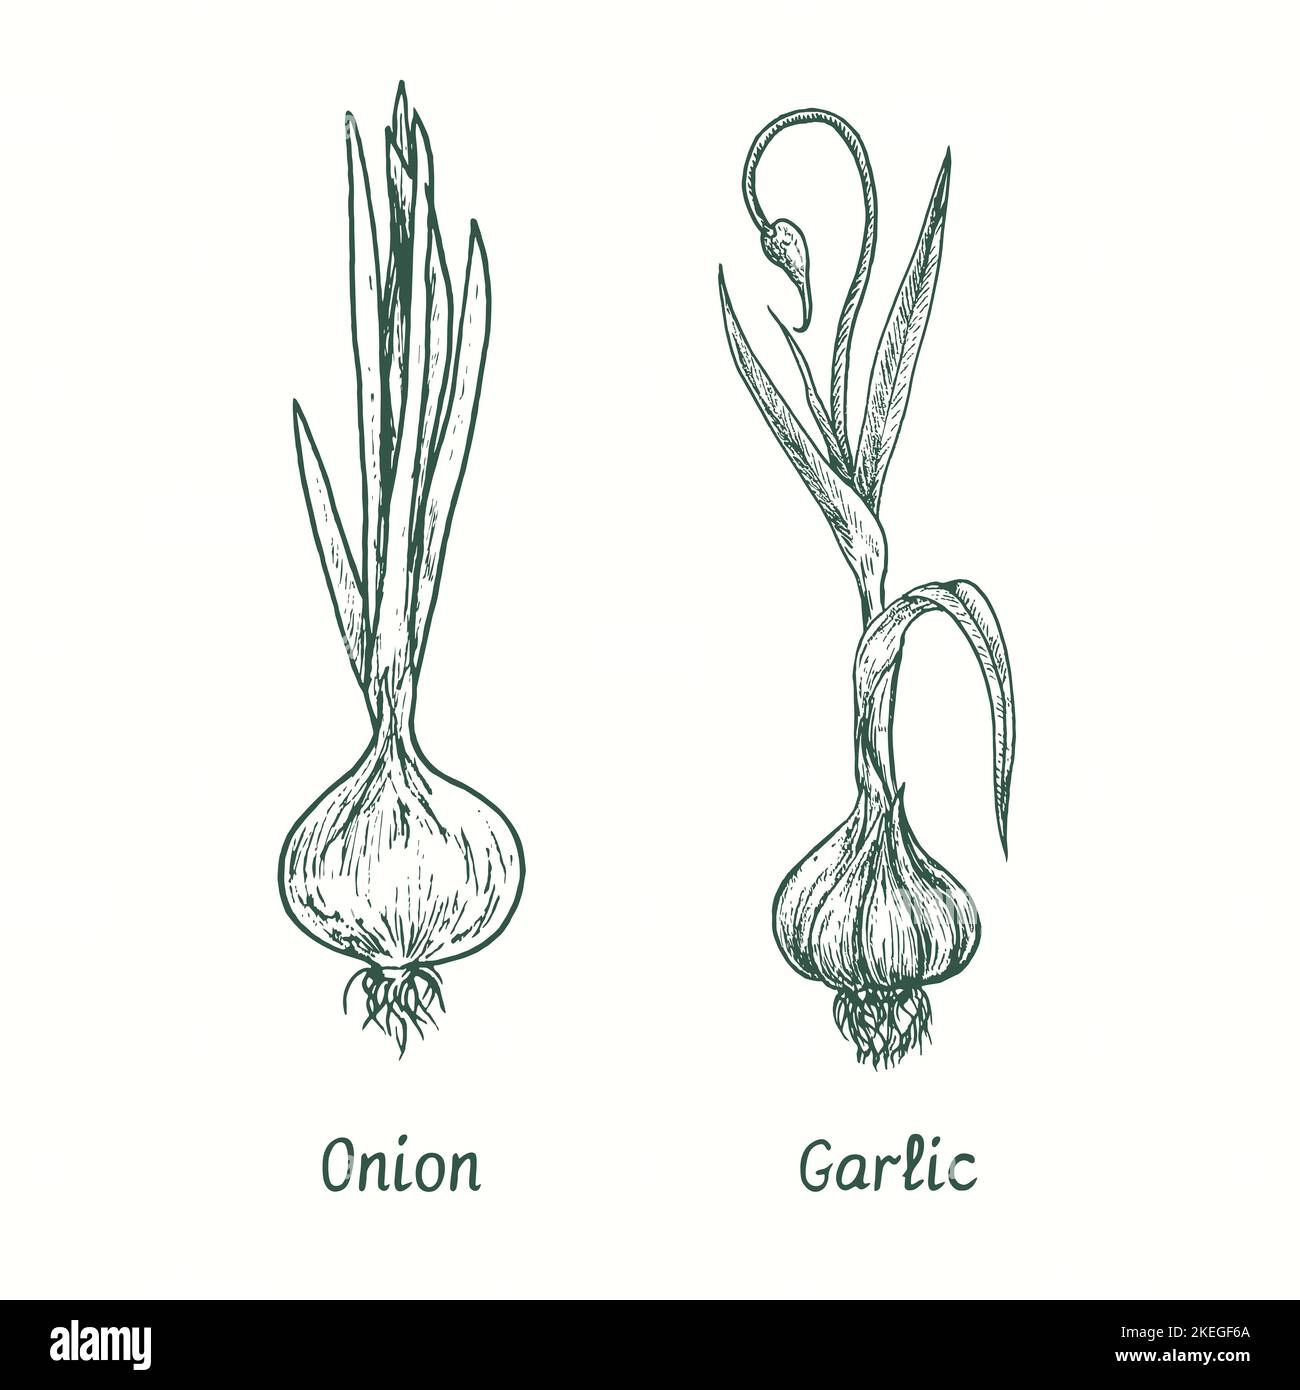 Onion and Garlic.  Ink black and white doodle drawing in woodcut style Stock Photo